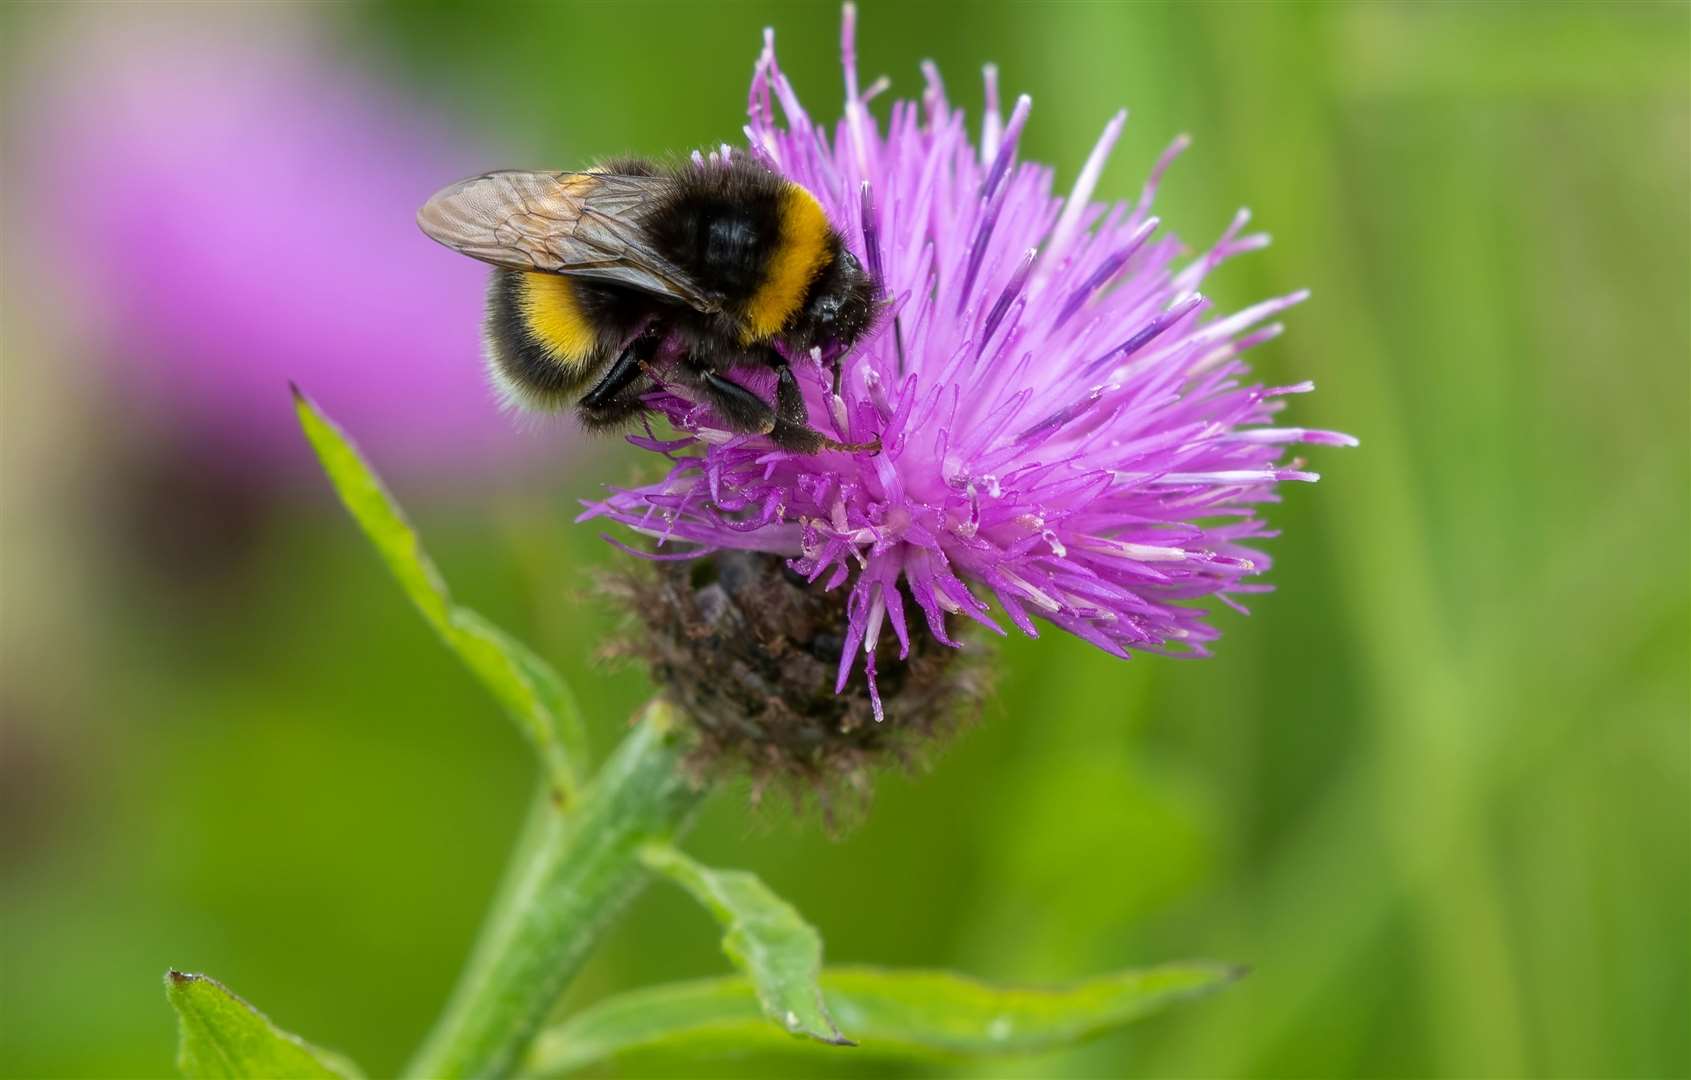 A bumble bee. Image: iStock.